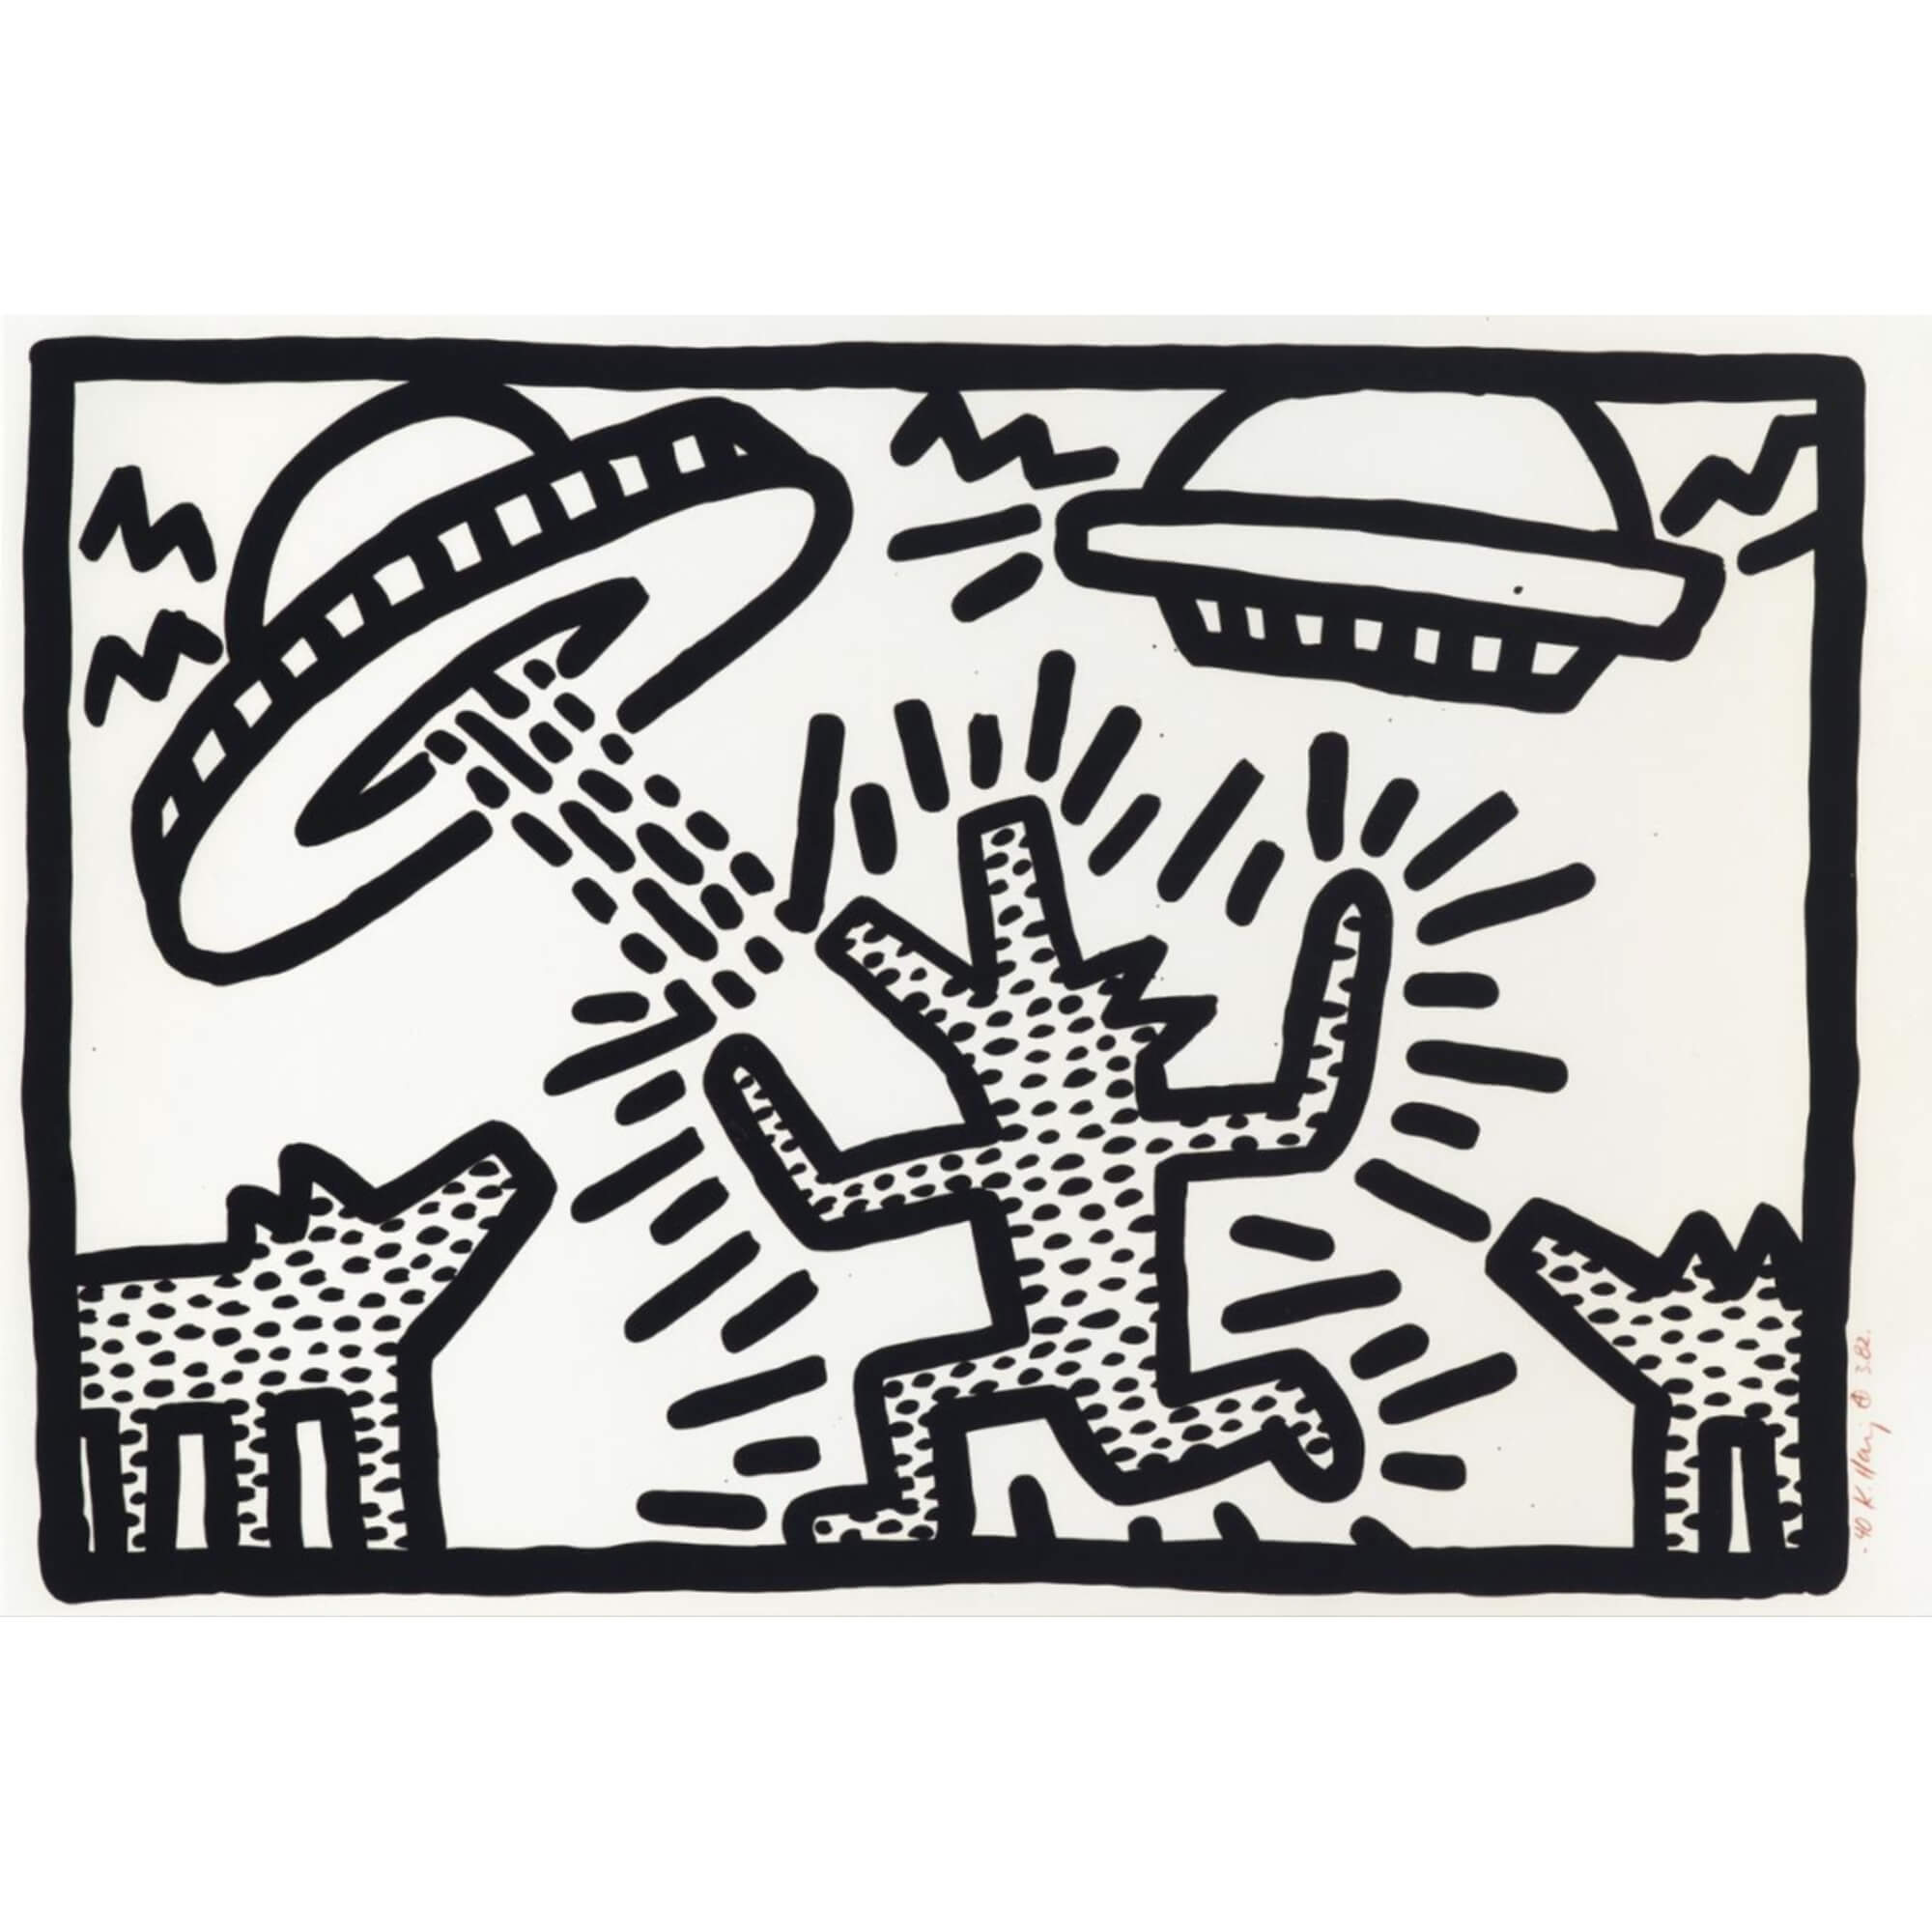 Keith Haring-Untitled (Dogs With Ufos) - Keith Haring-art print